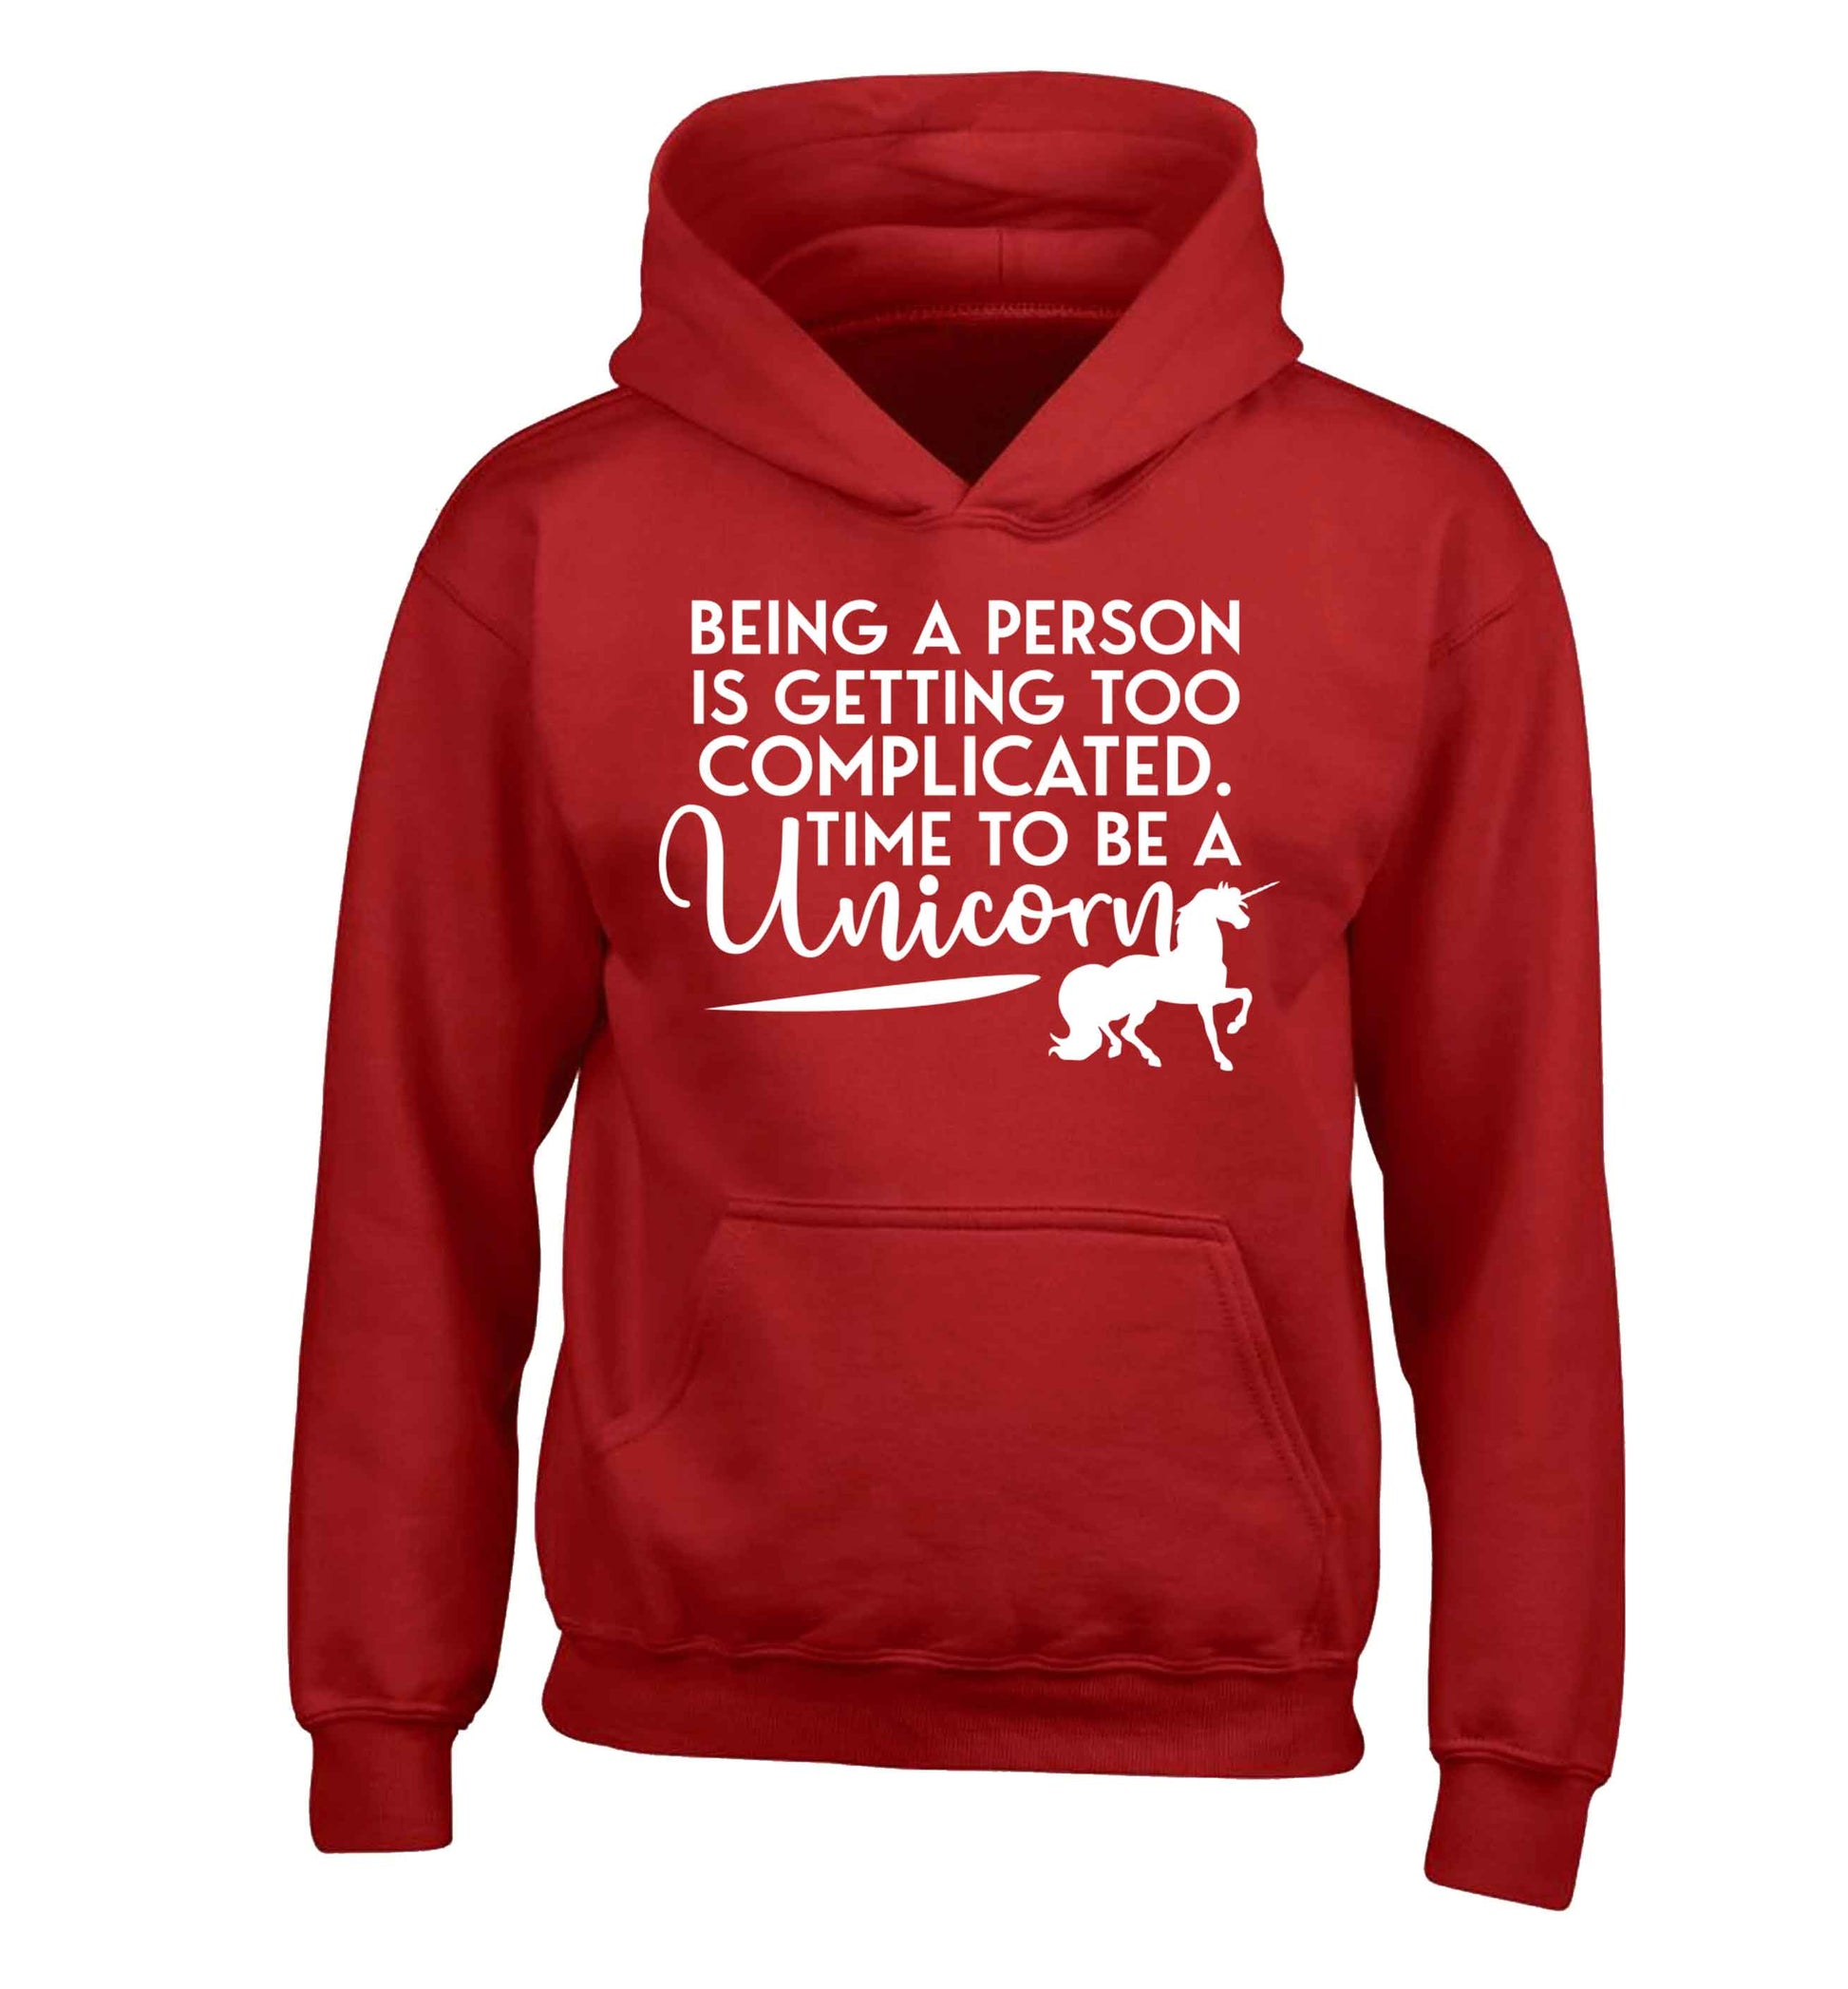 Being a person is getting too complicated time to be a unicorn children's red hoodie 12-13 Years